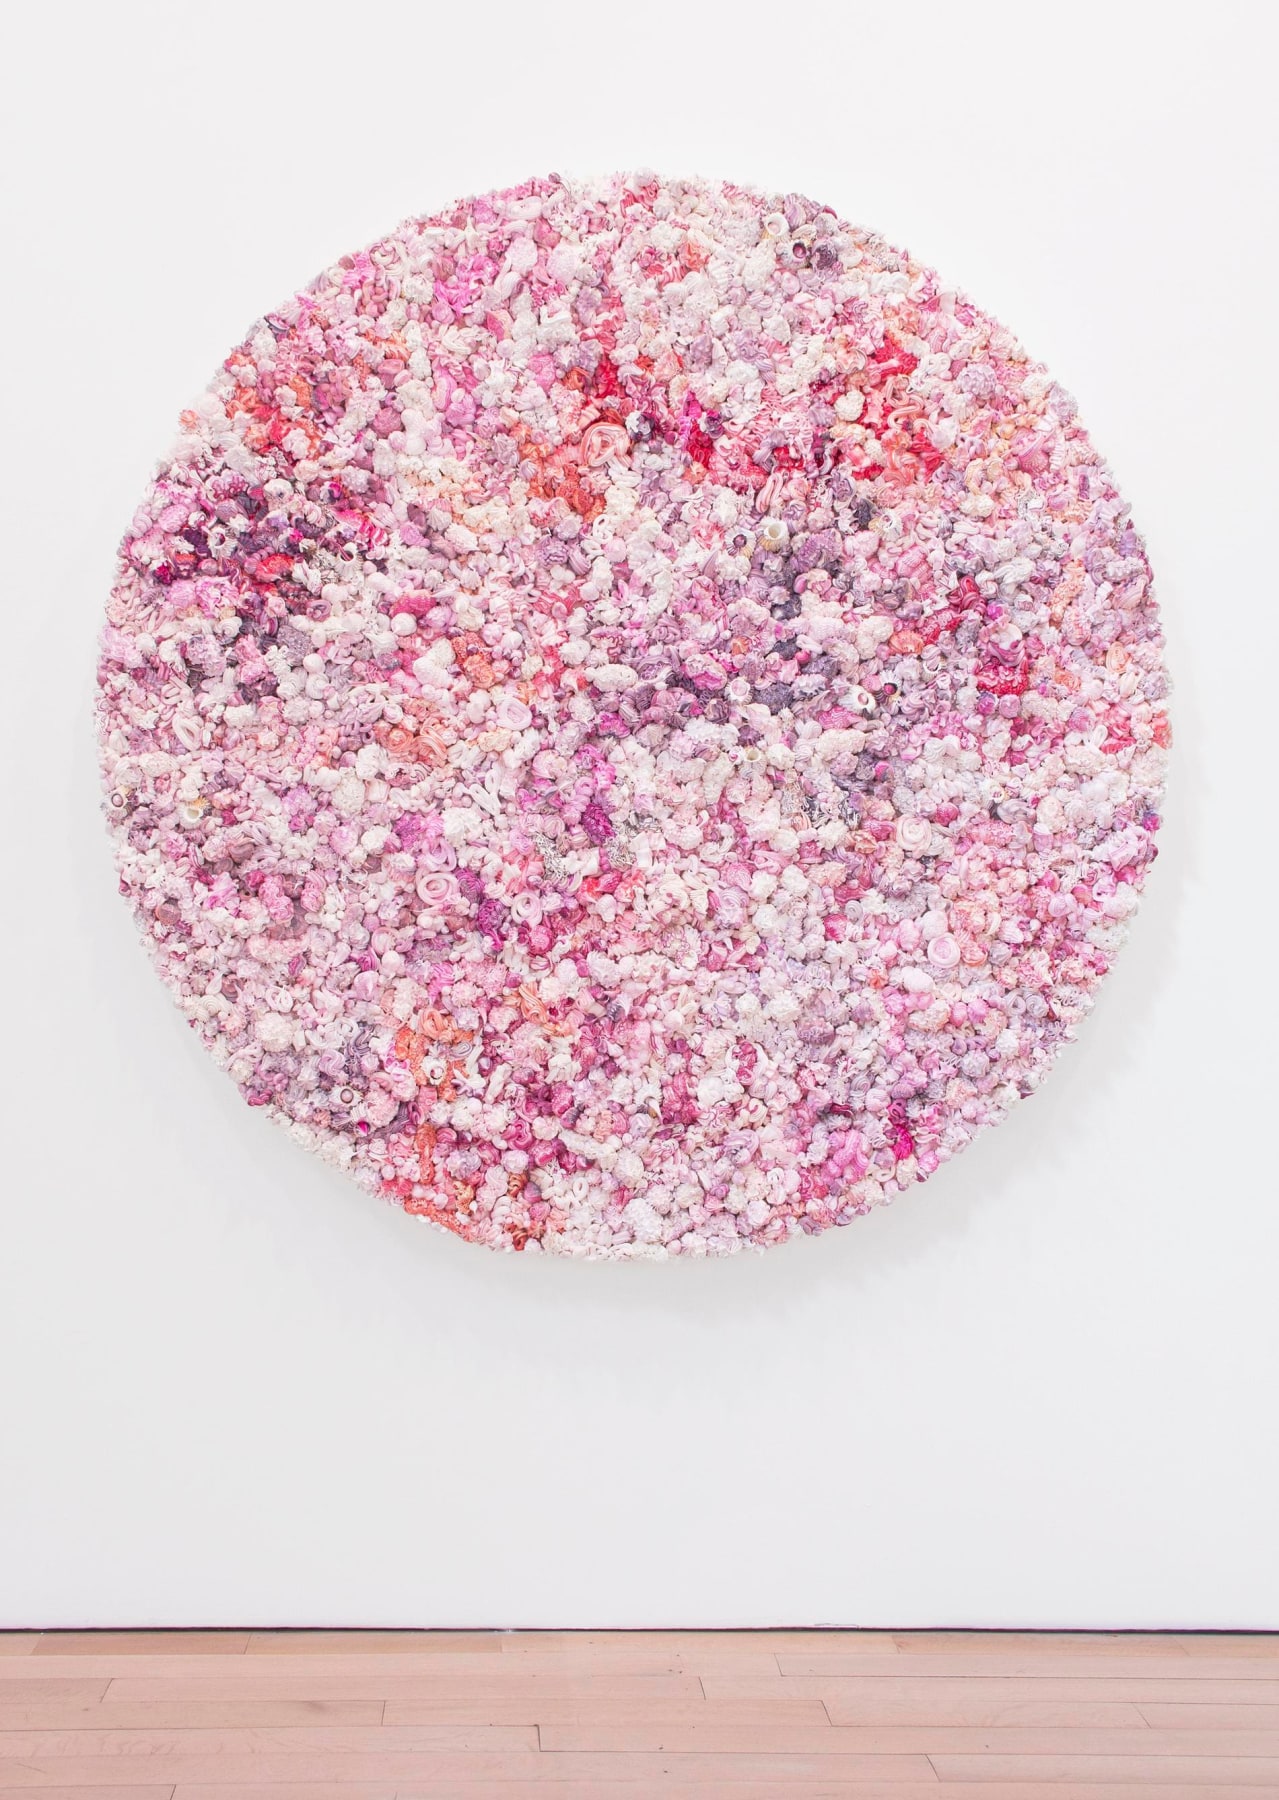 A series of pink, purple, white and red whipped-cream-like dollops made of oil paint on a circular panel